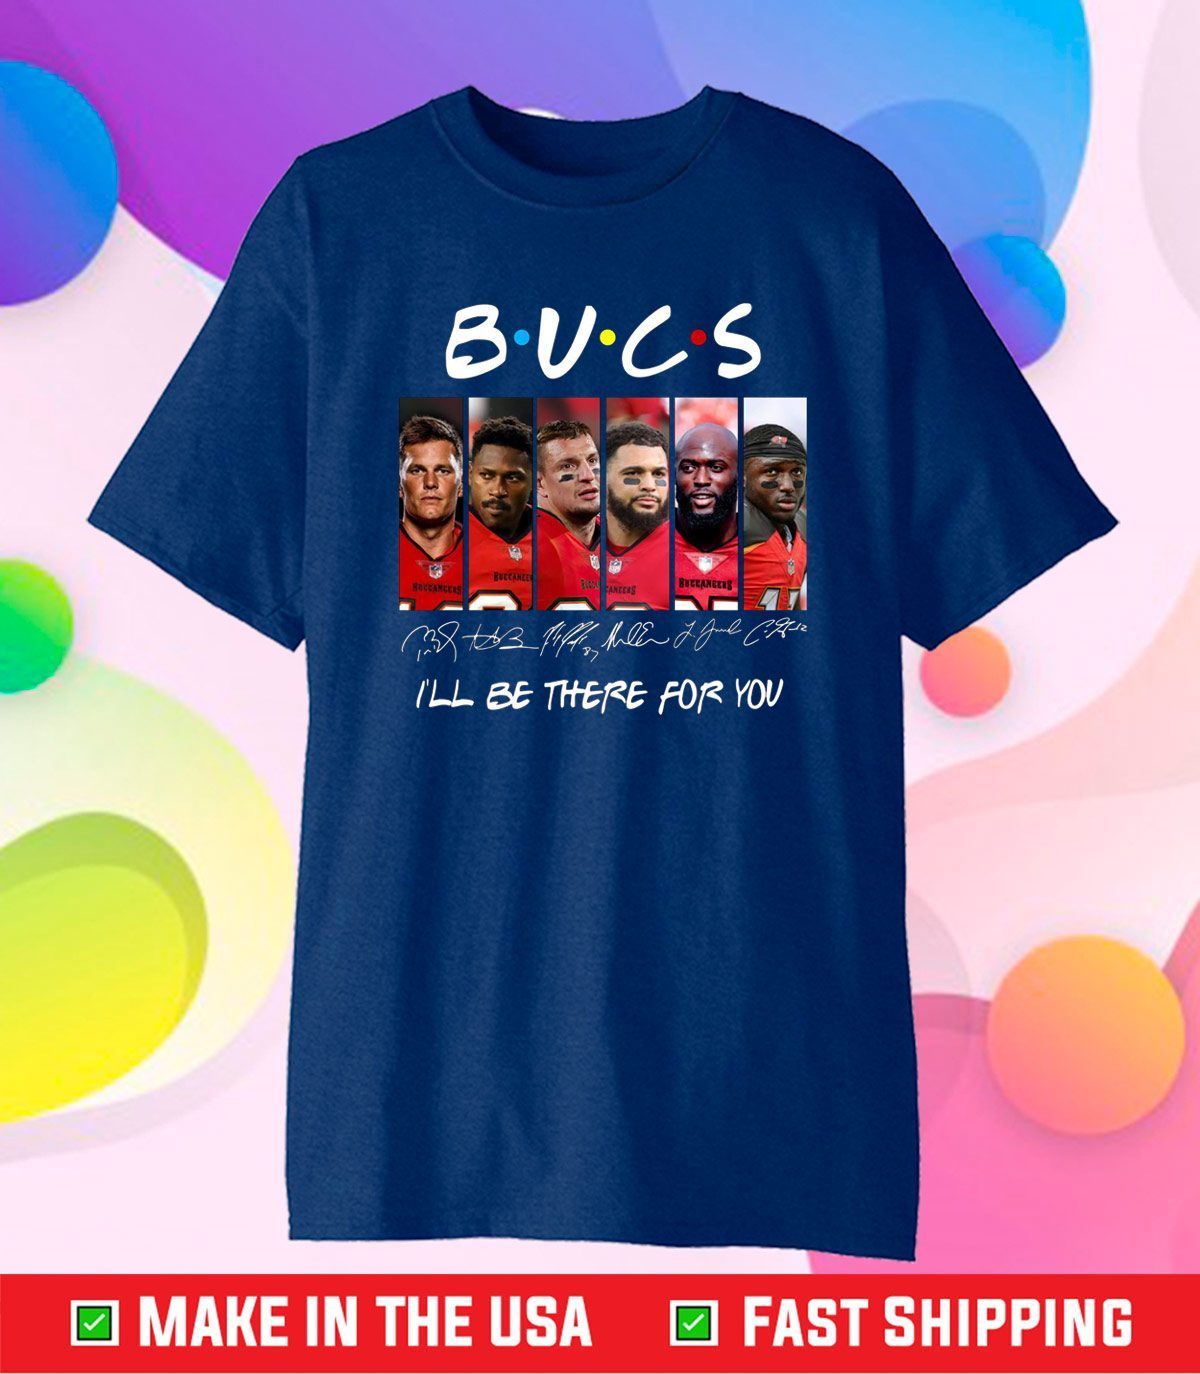 BUCS Friends I'll Be There For You tshirt , Tampa Bay Buccaneers